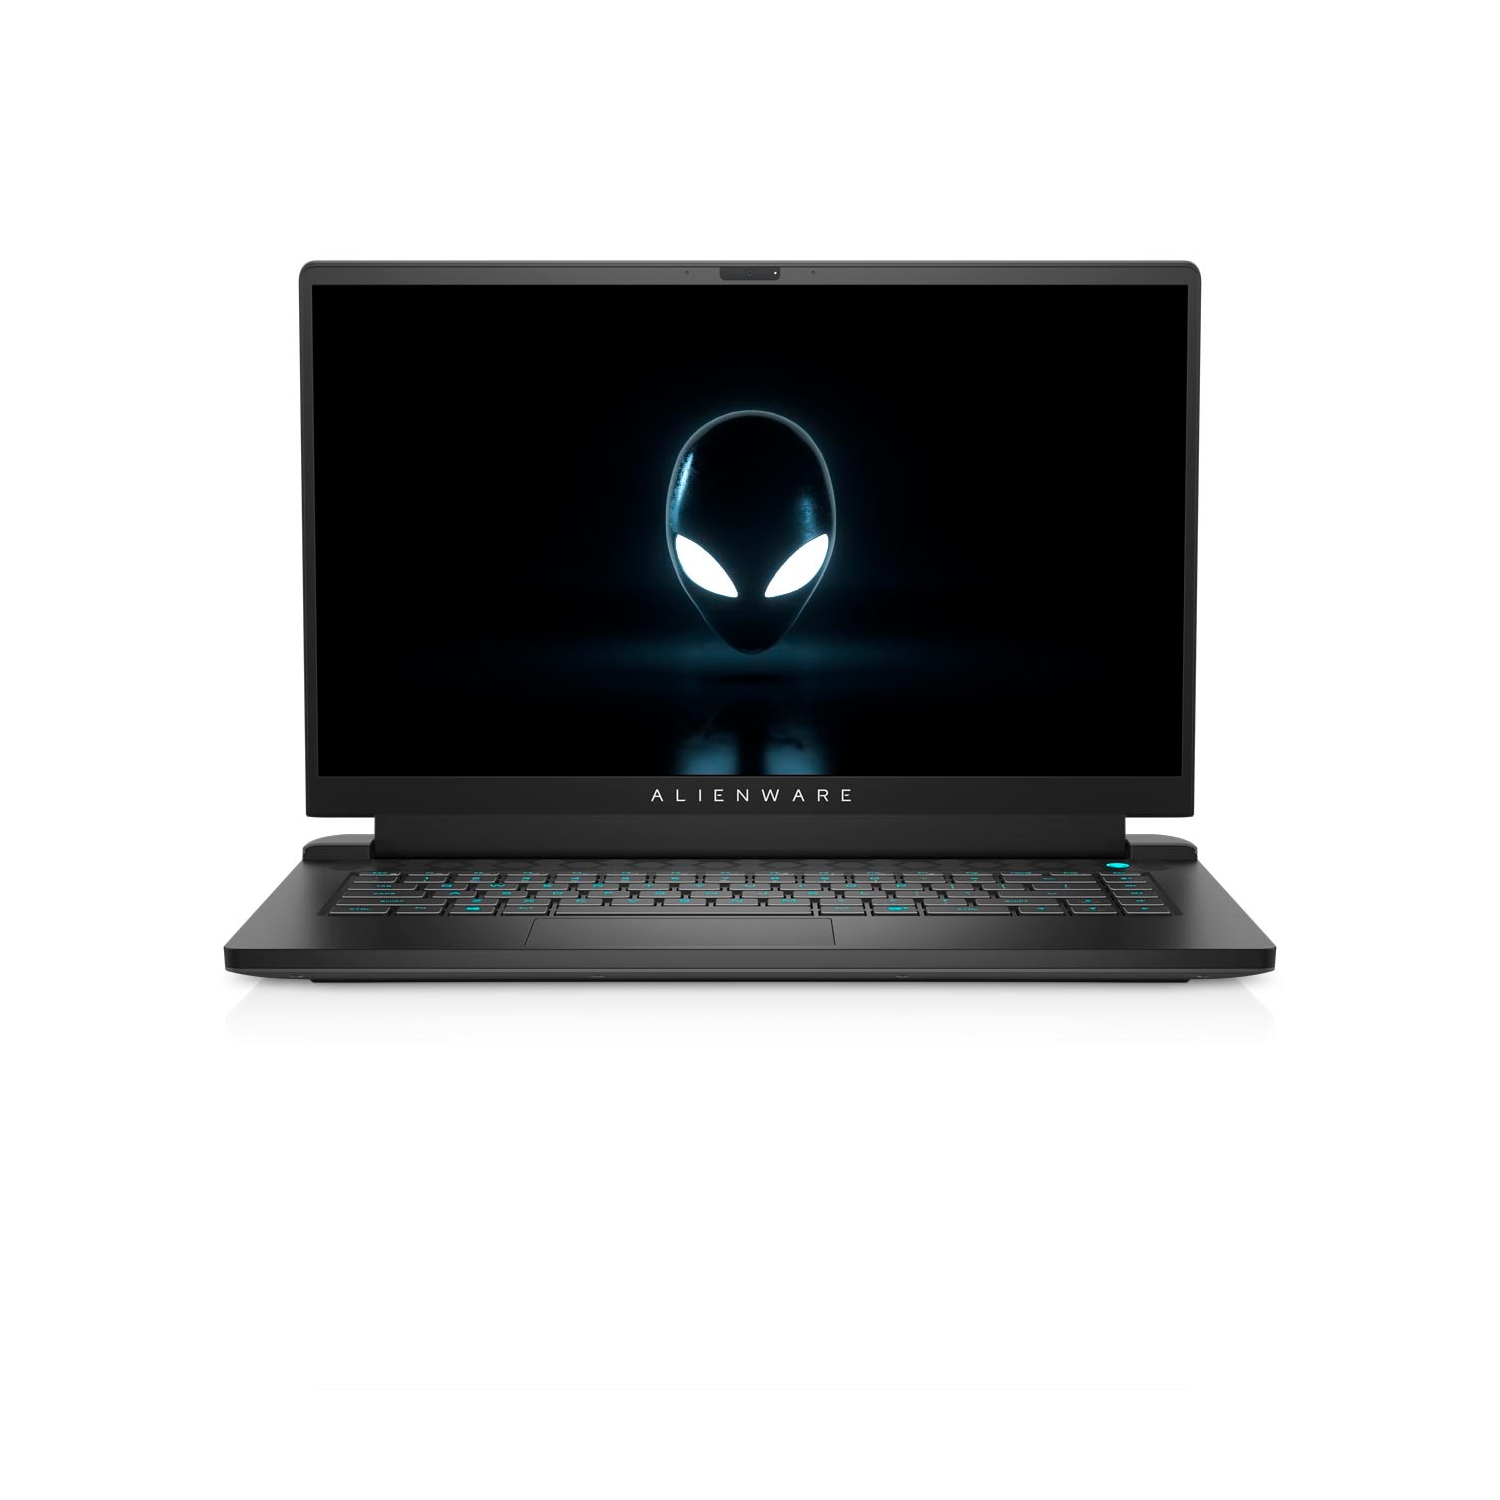 Refurbished (Excellent) - Dell Alienware m15 R5 Ryzen Edition Gaming Laptop (2021), 15.6" FHD, Core Ryzen 7, 256GB SSD, 8GB RAM, 3050 Ti, 8 Cores @ 4.4 GHz Certified